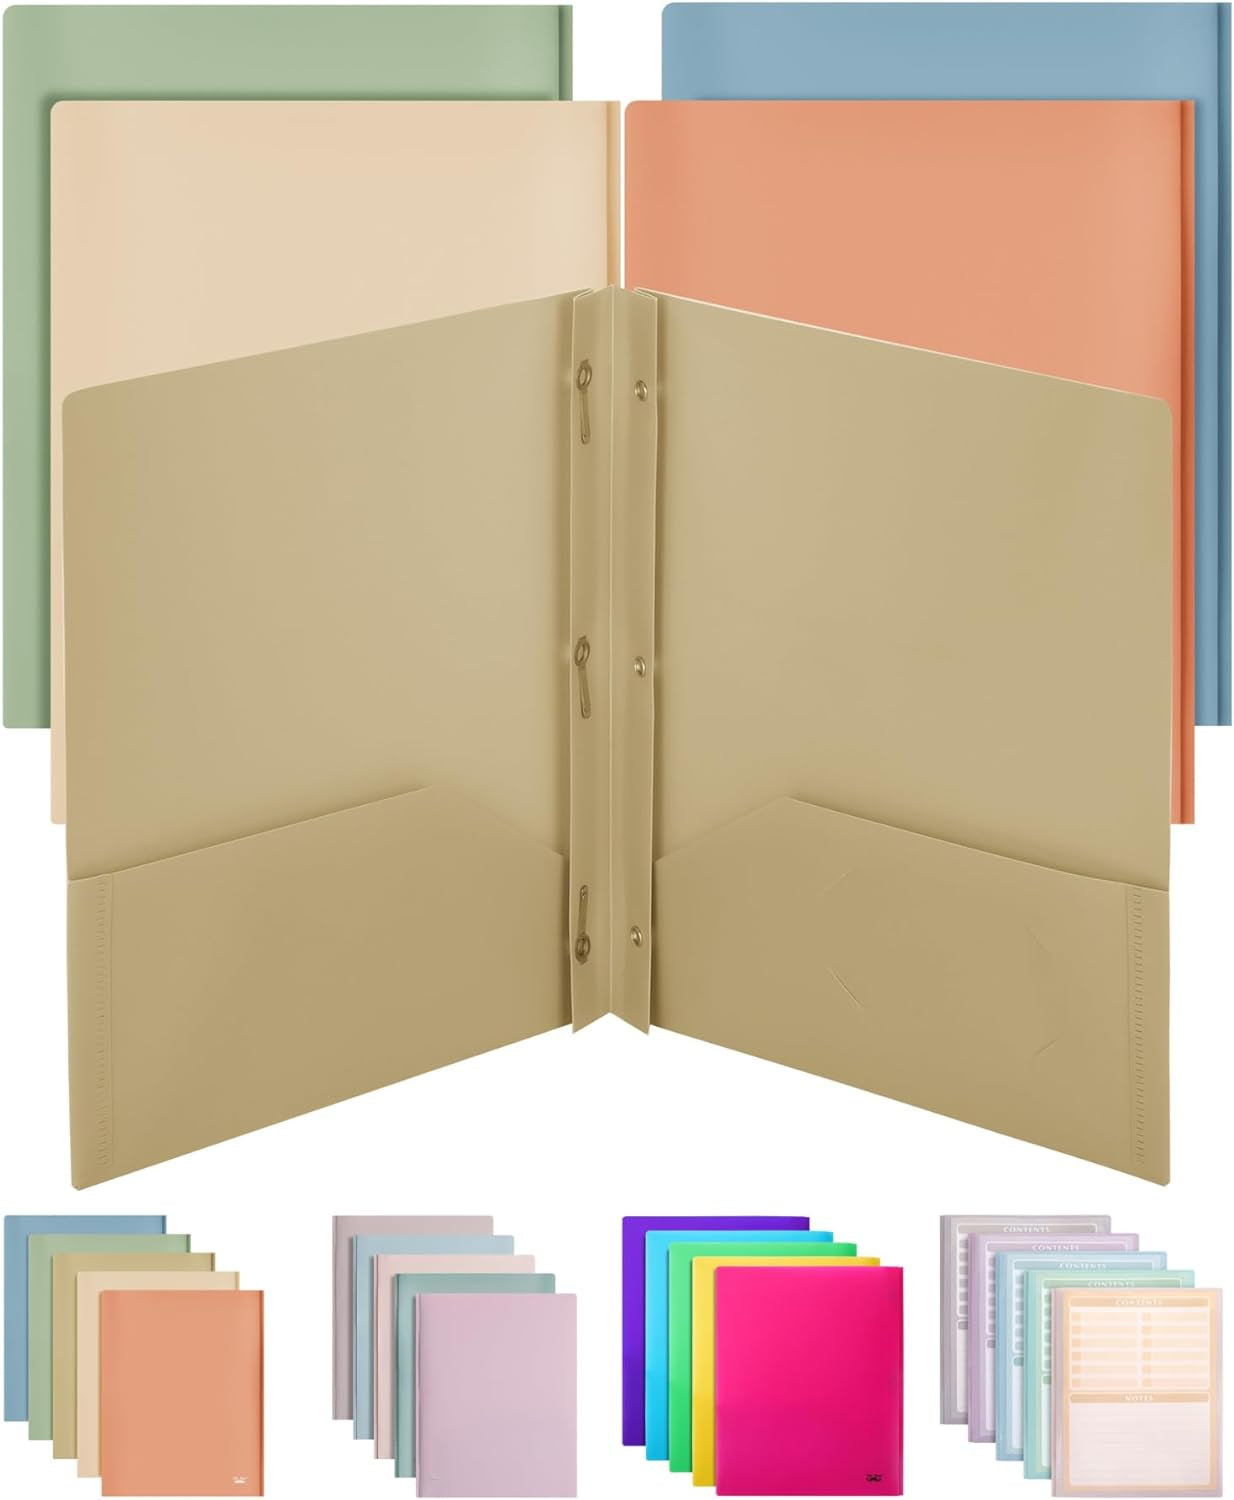 - Plastic Folders with Pockets and Prong, 5 Pack, Muted Pastel Colors, Pocket Folders, File Fasteners, 2 Folder, Two